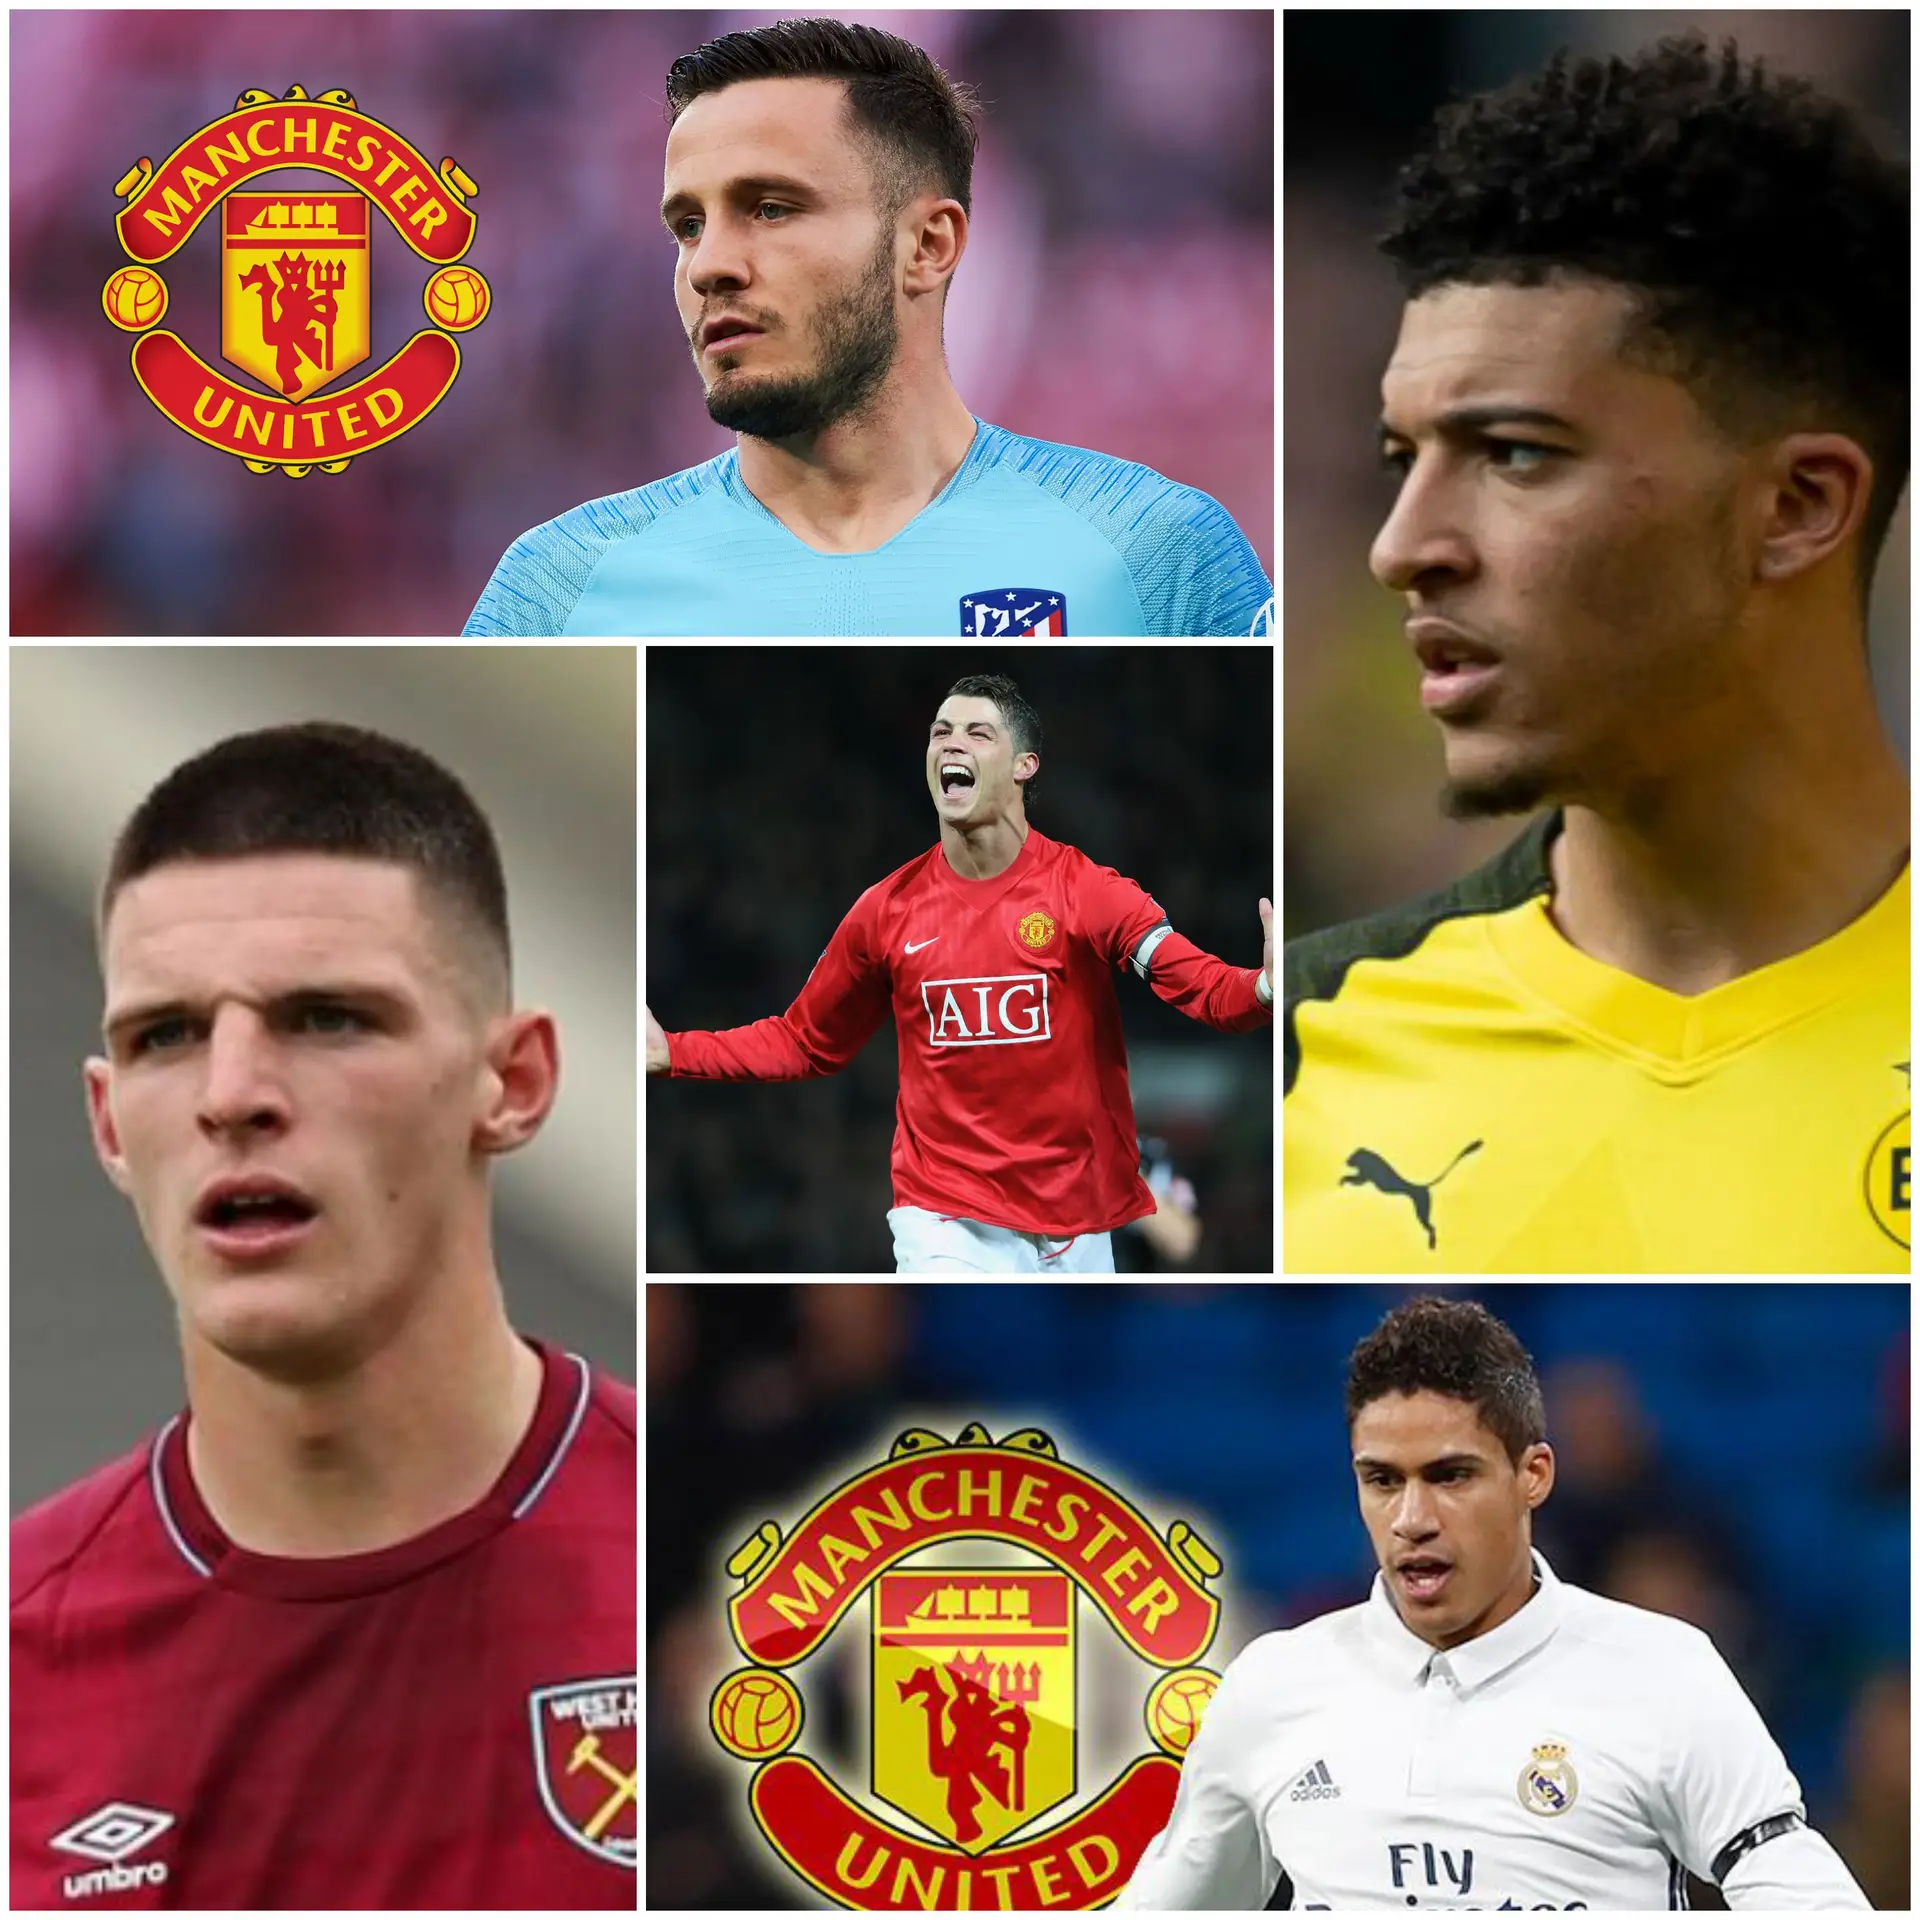 Here's how United's ideal Transfer window should look like